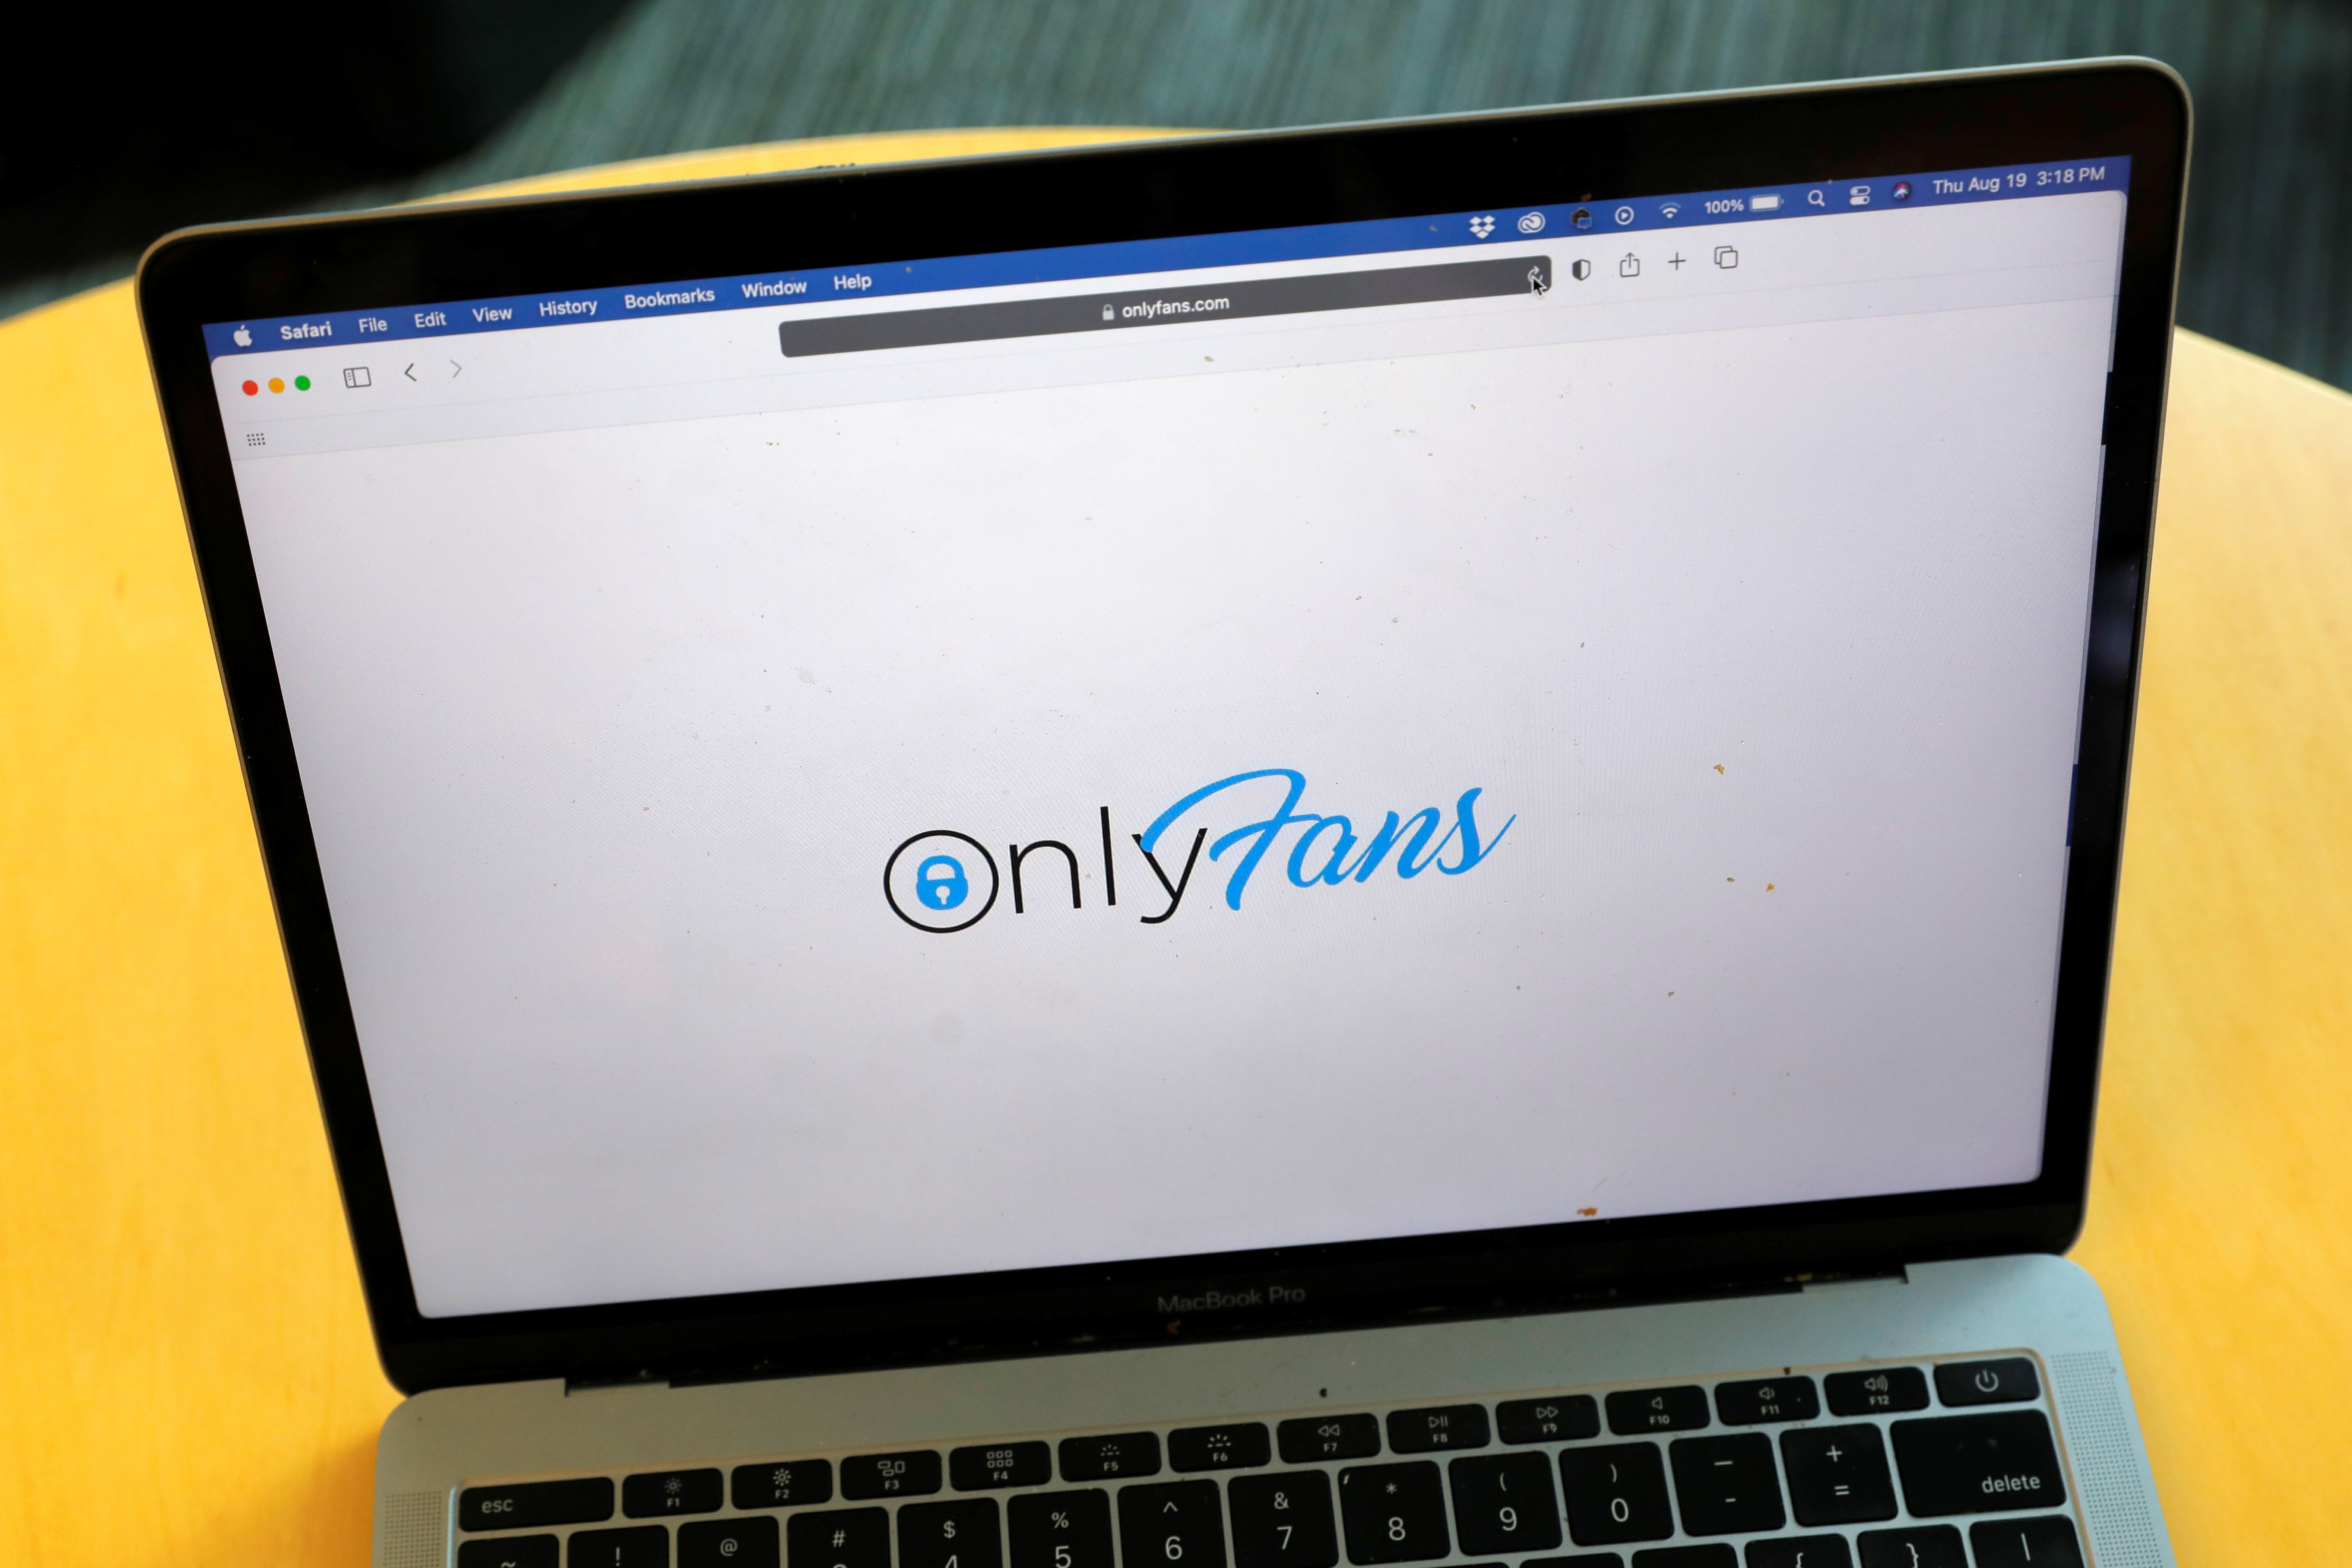 OnlyFans reverses ban on posting ‘sexually explicit’ content